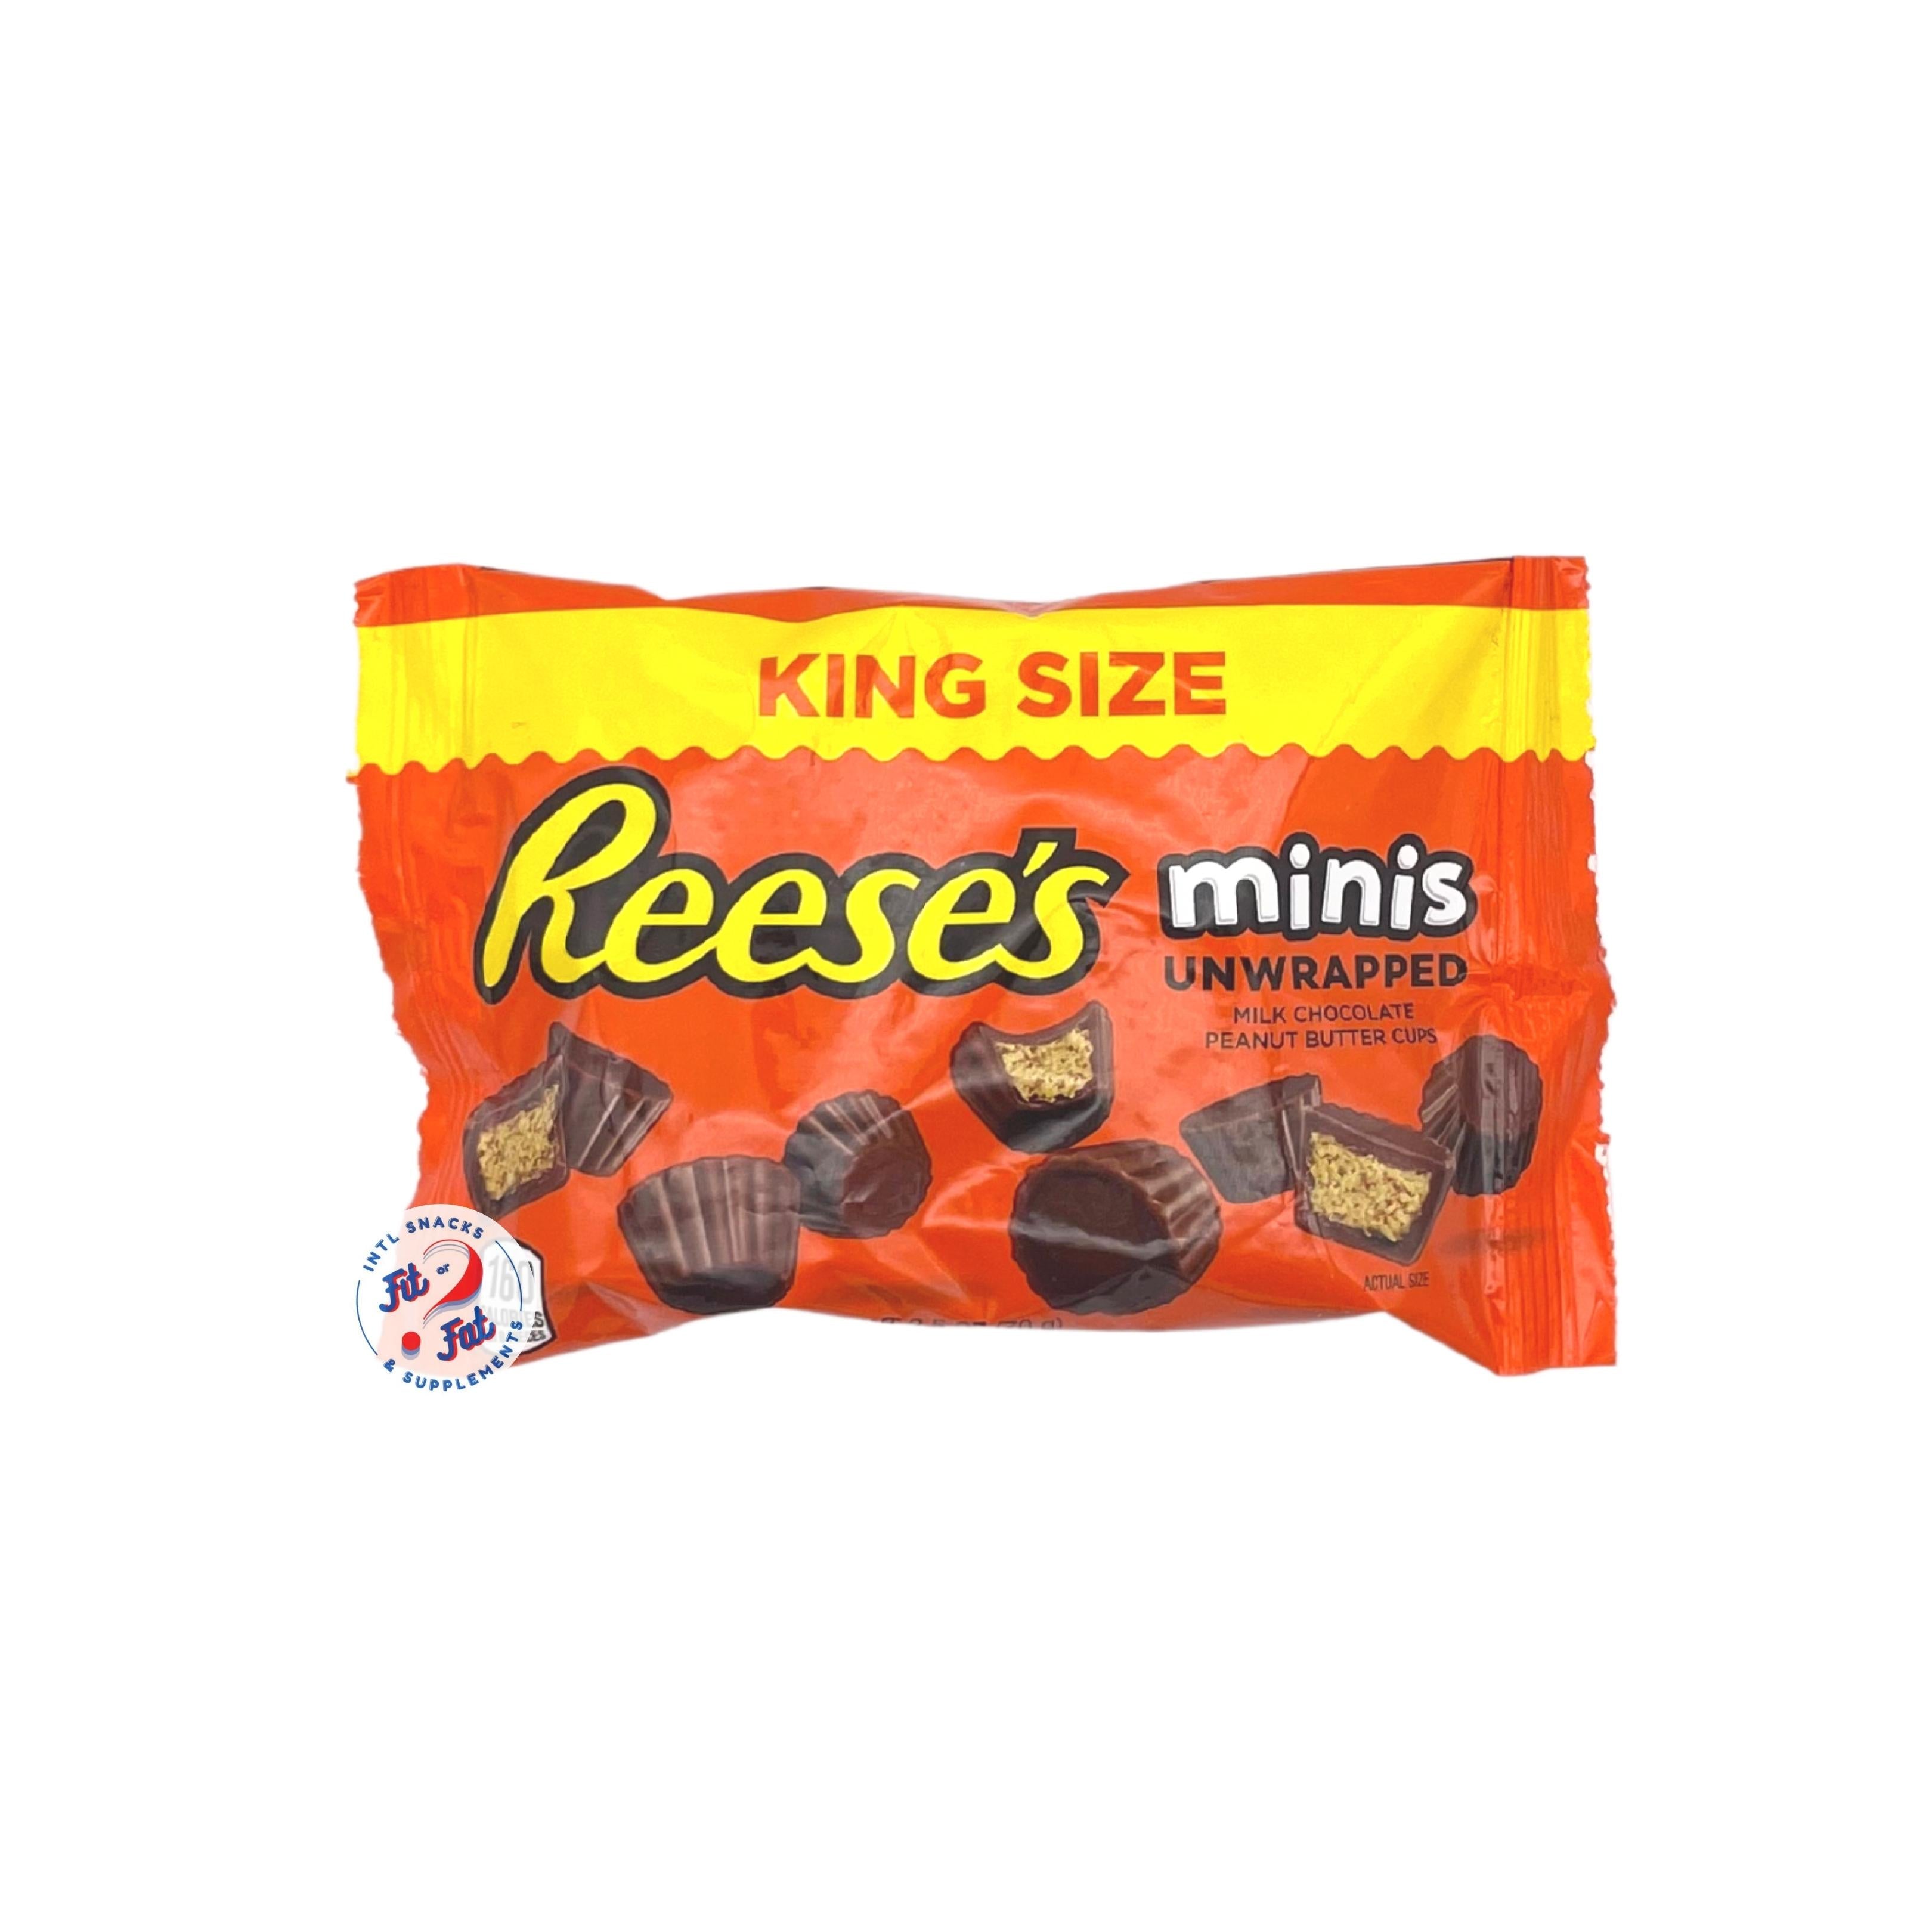 Reese’s Minis Unwrapped King Size